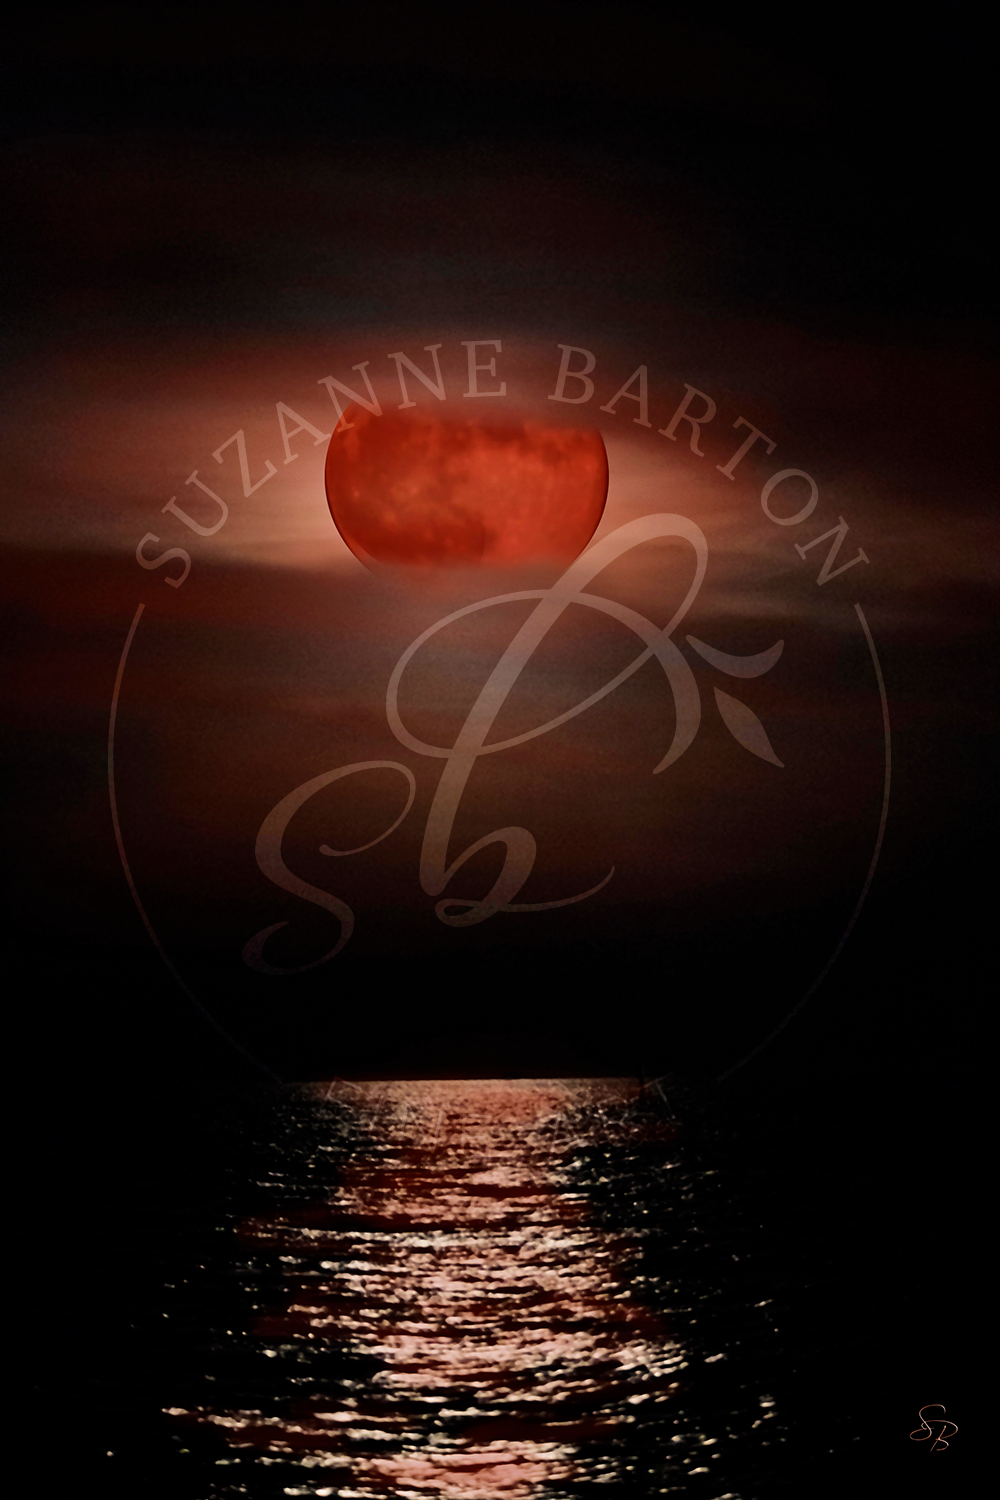 Blood Moon - Suzanne Barton - Limited Edition